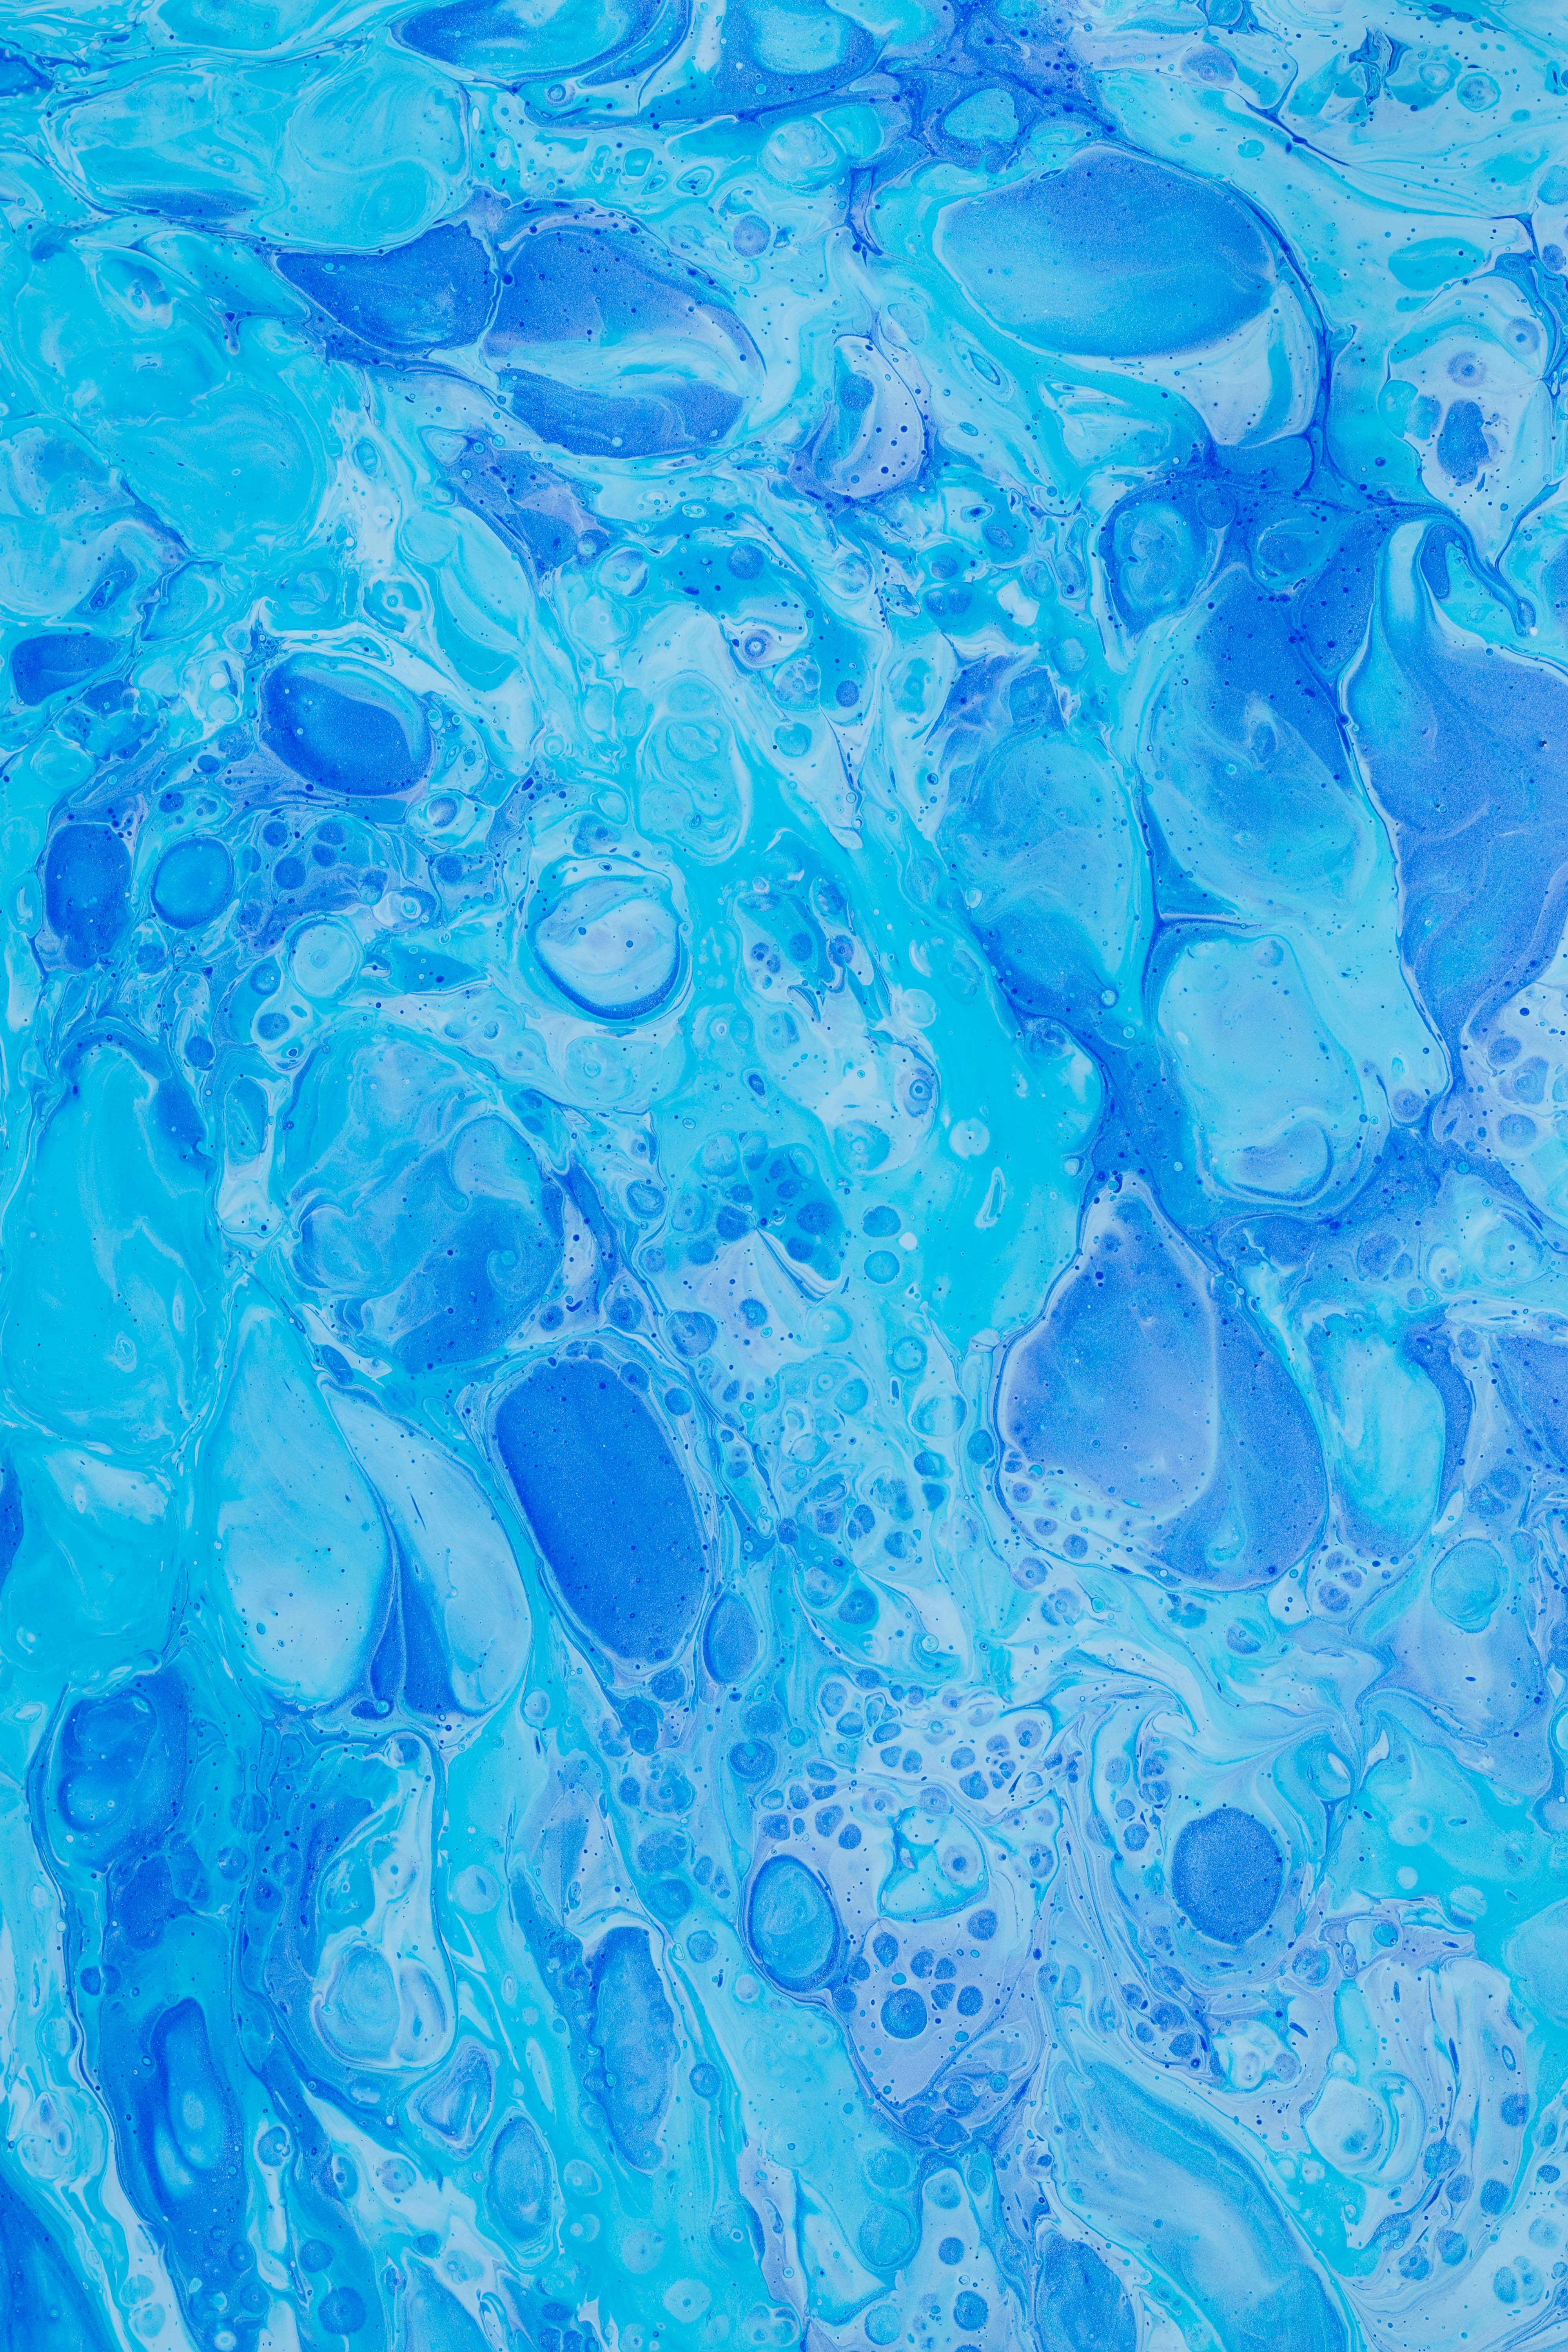 HD wallpaper watercolor, blue, abstract, paint, stains, spots